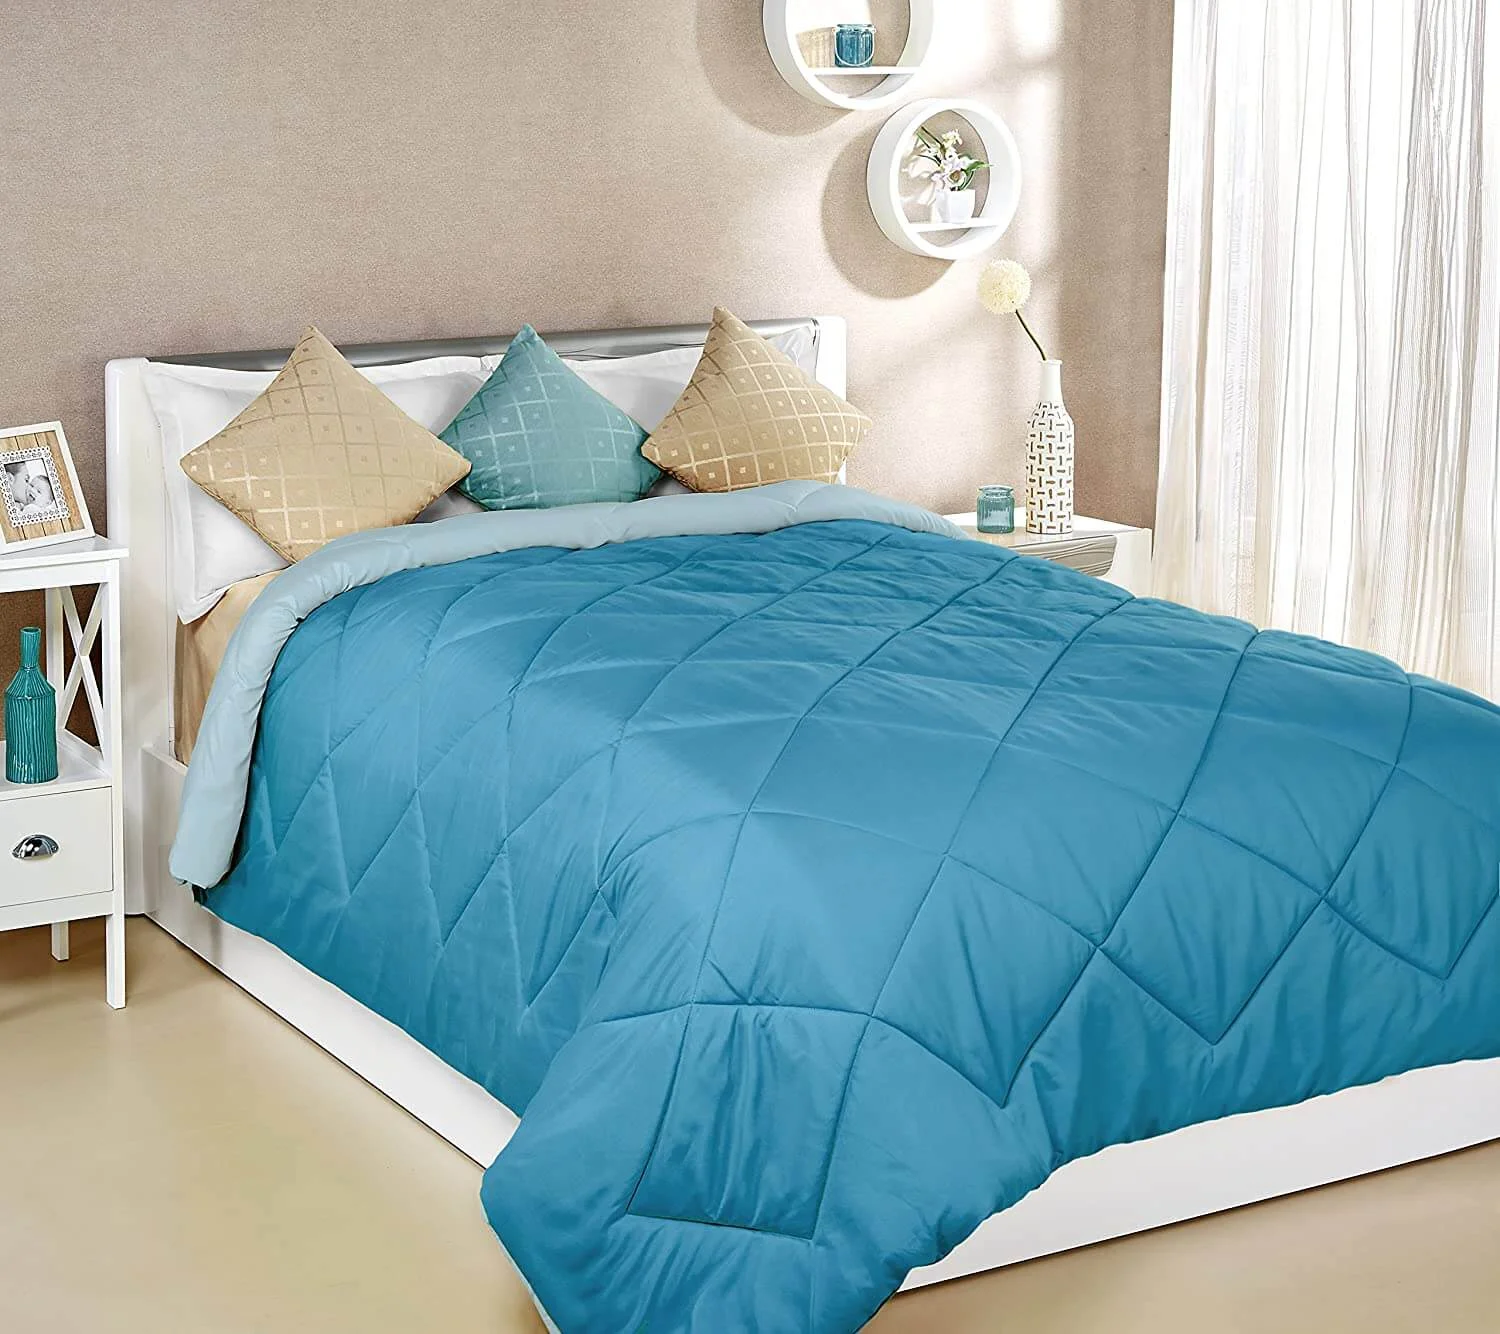 Double Bed Blanket Cover With Zipper